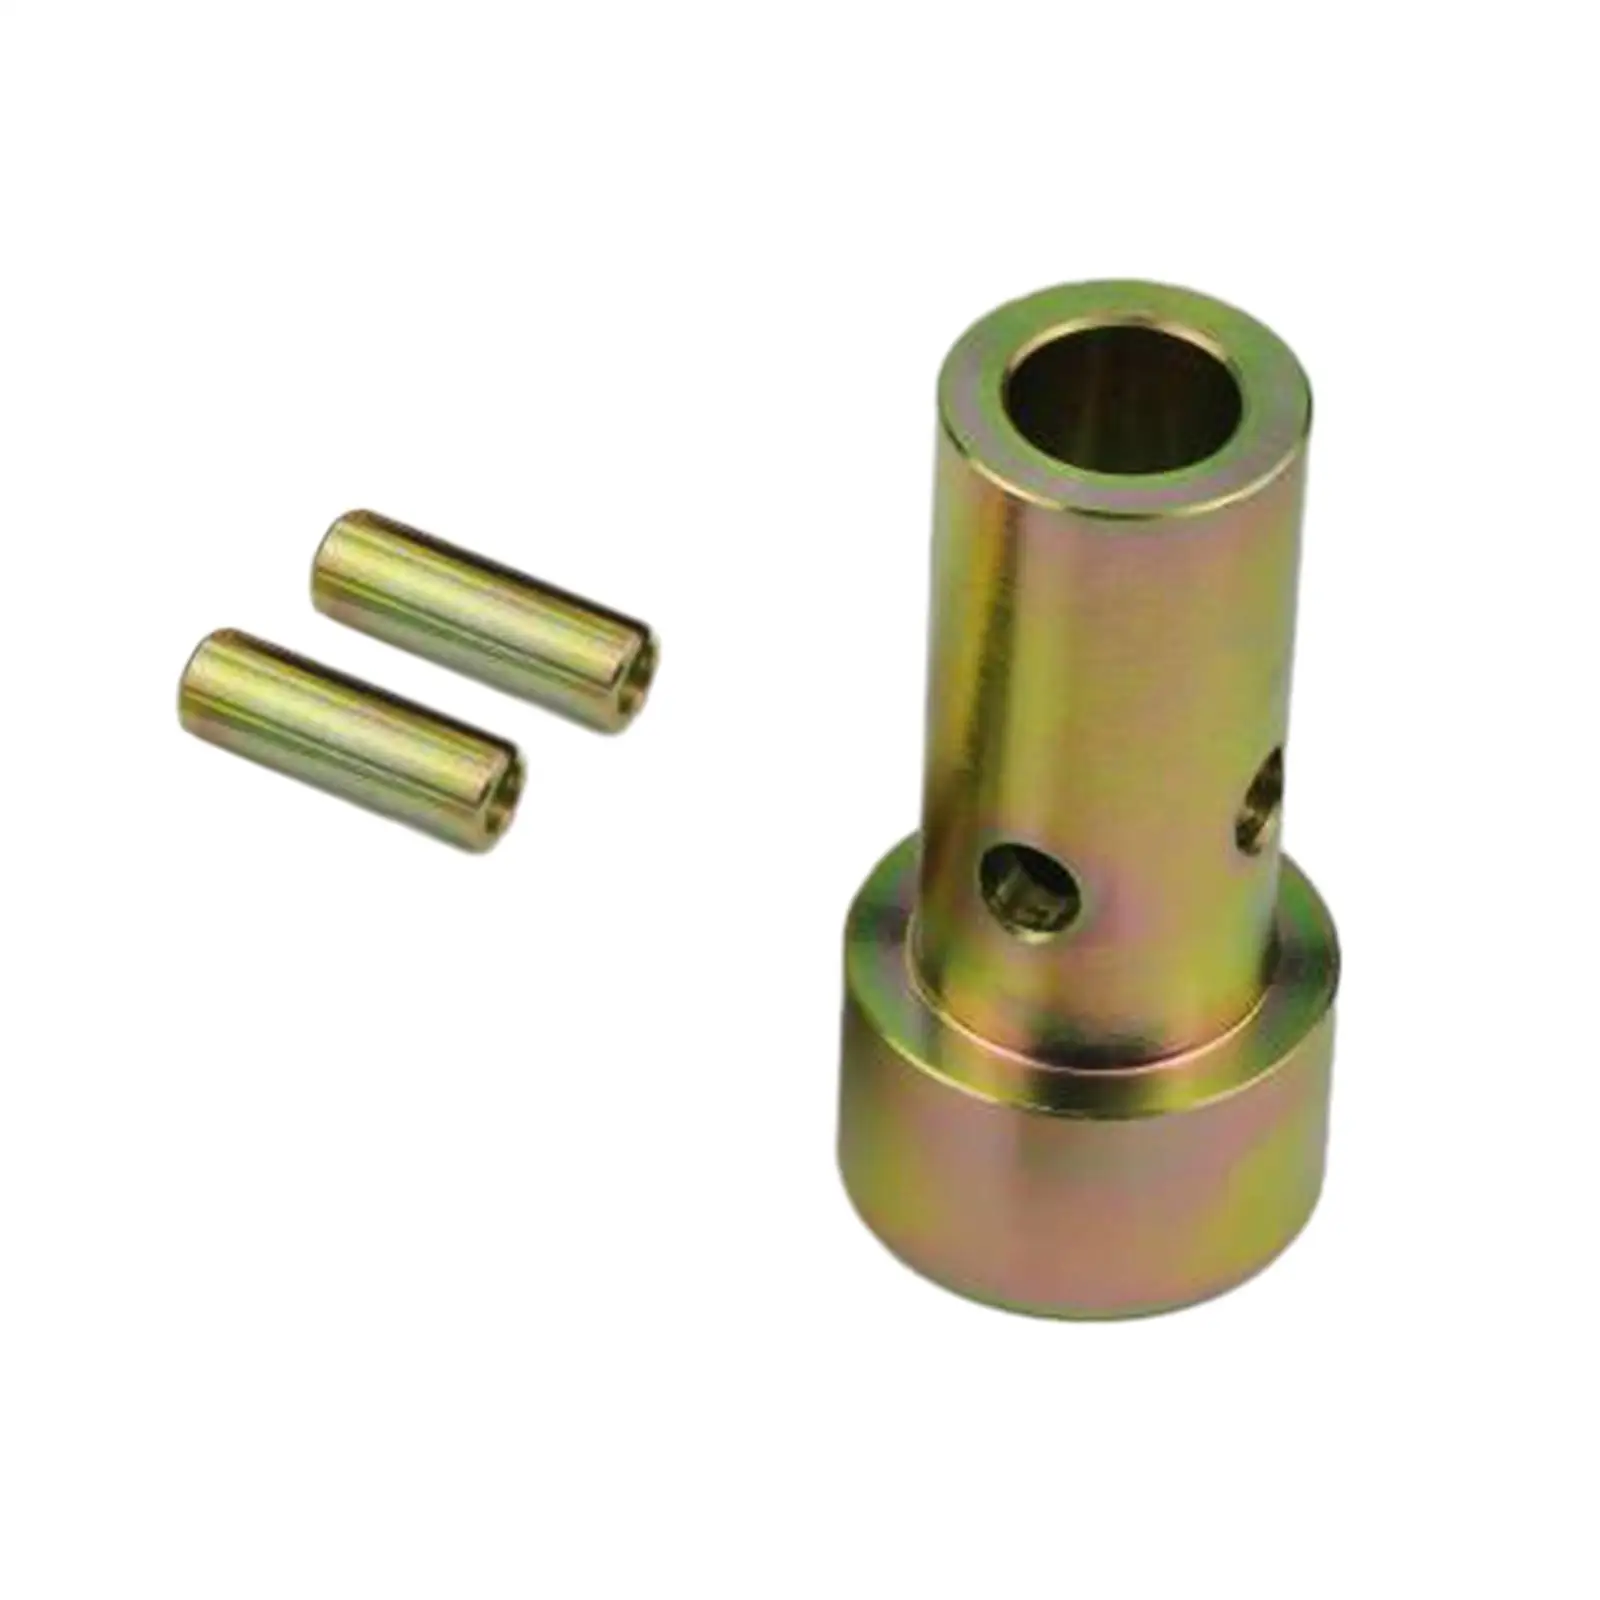 Adapter Bushings Set for Category 1 Replaces Durable Easy Installation Metal Strong Heavy Duty Implement Hitch Cat 1 Bushings